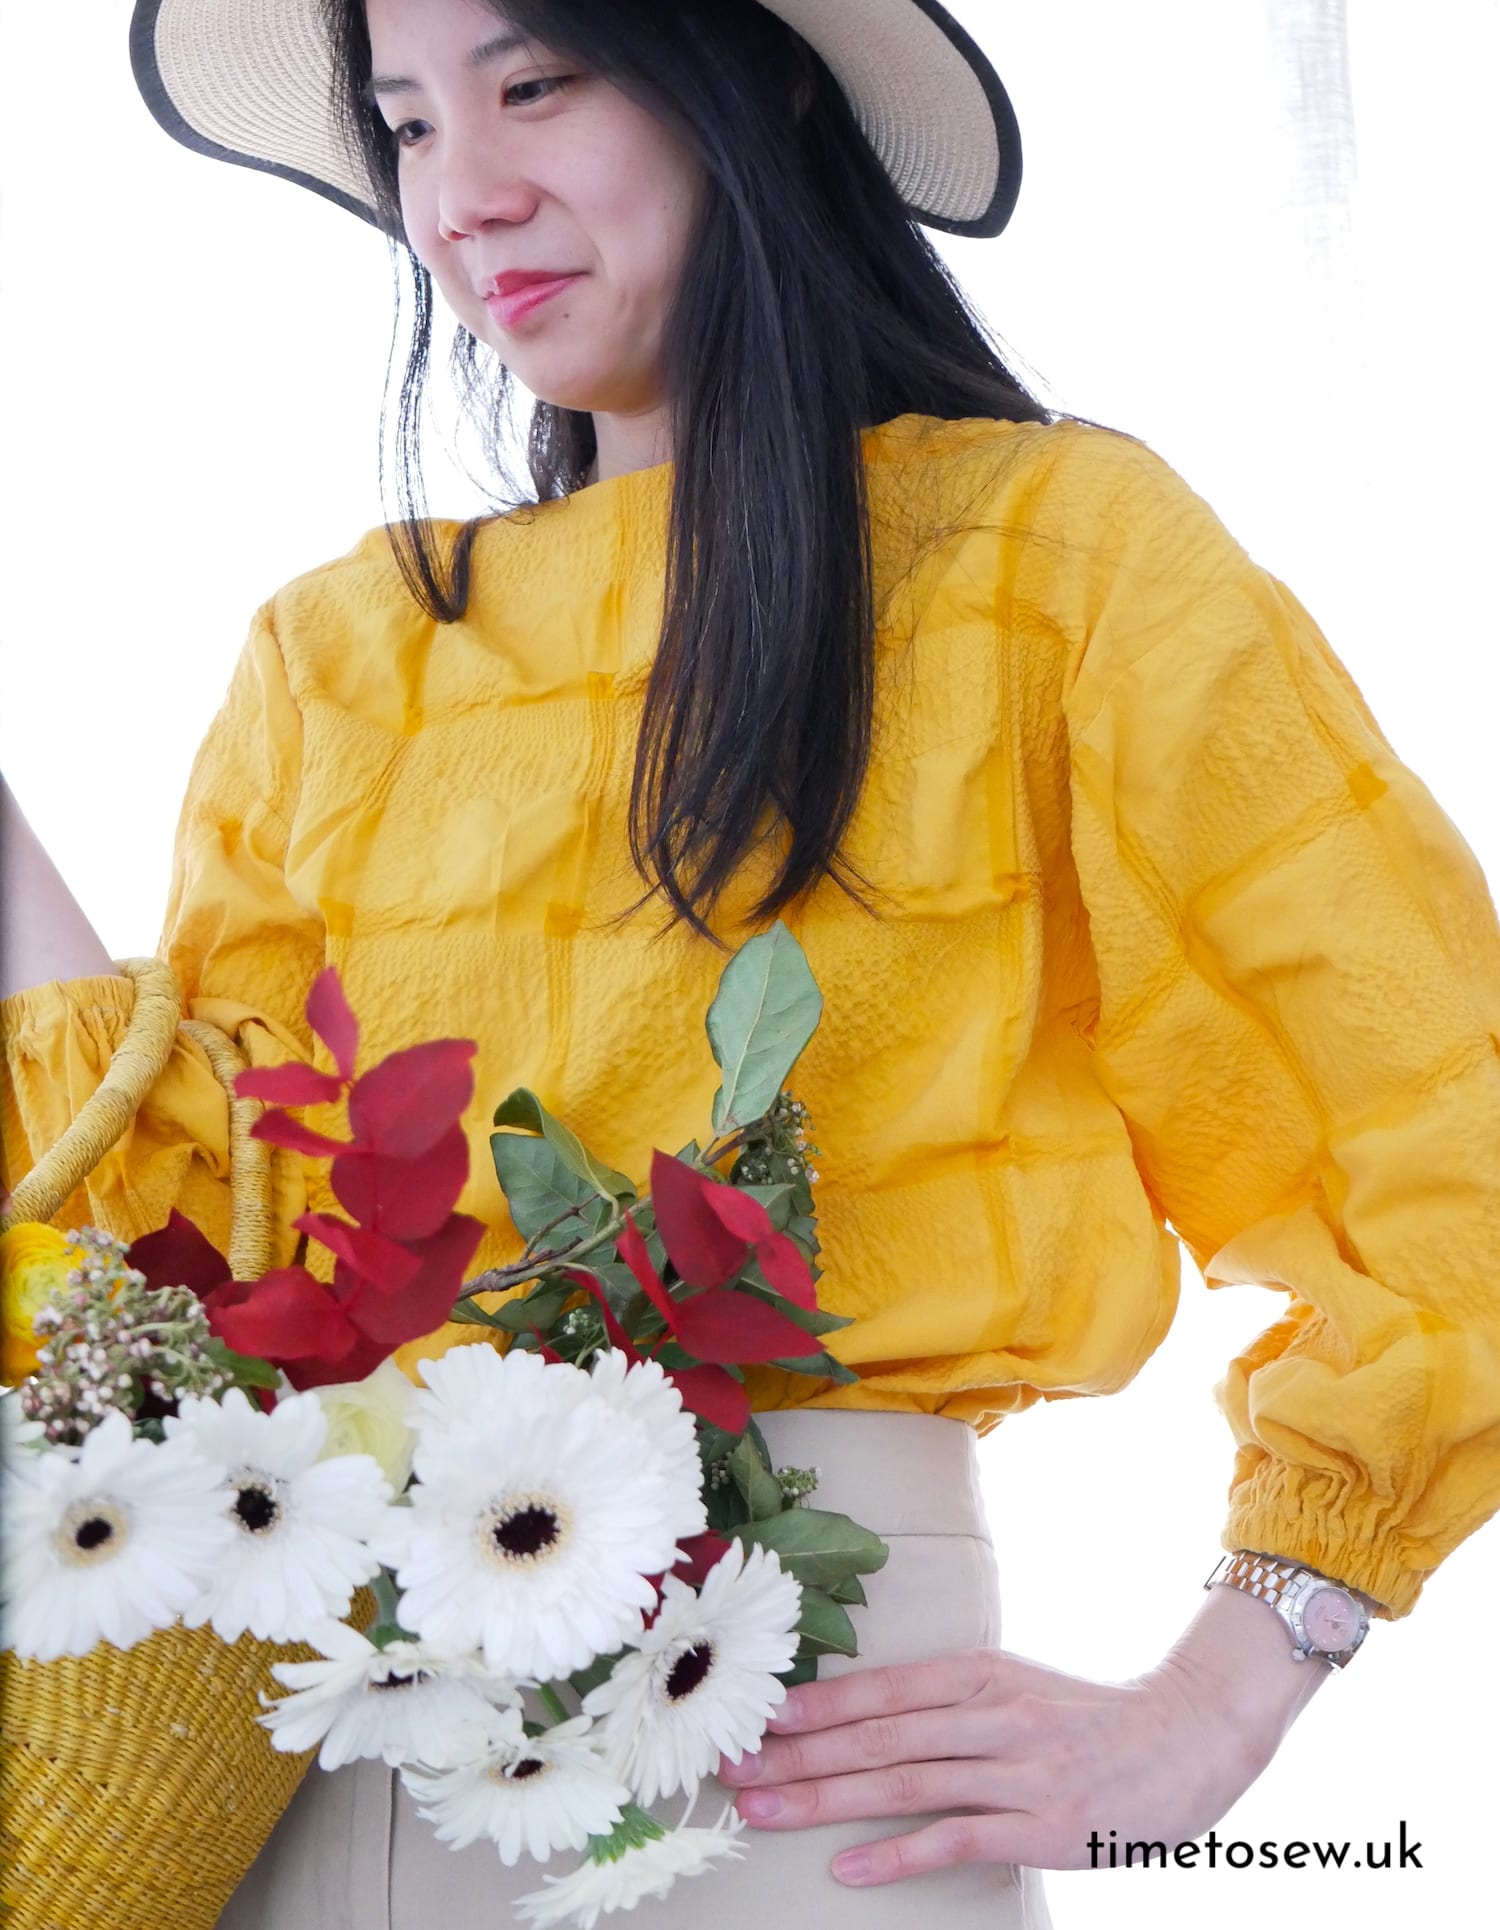 Kate wears a yellow top (Just Patterns Tyra tee) with an XL grid pattern with a summer hat and a basket of flowers